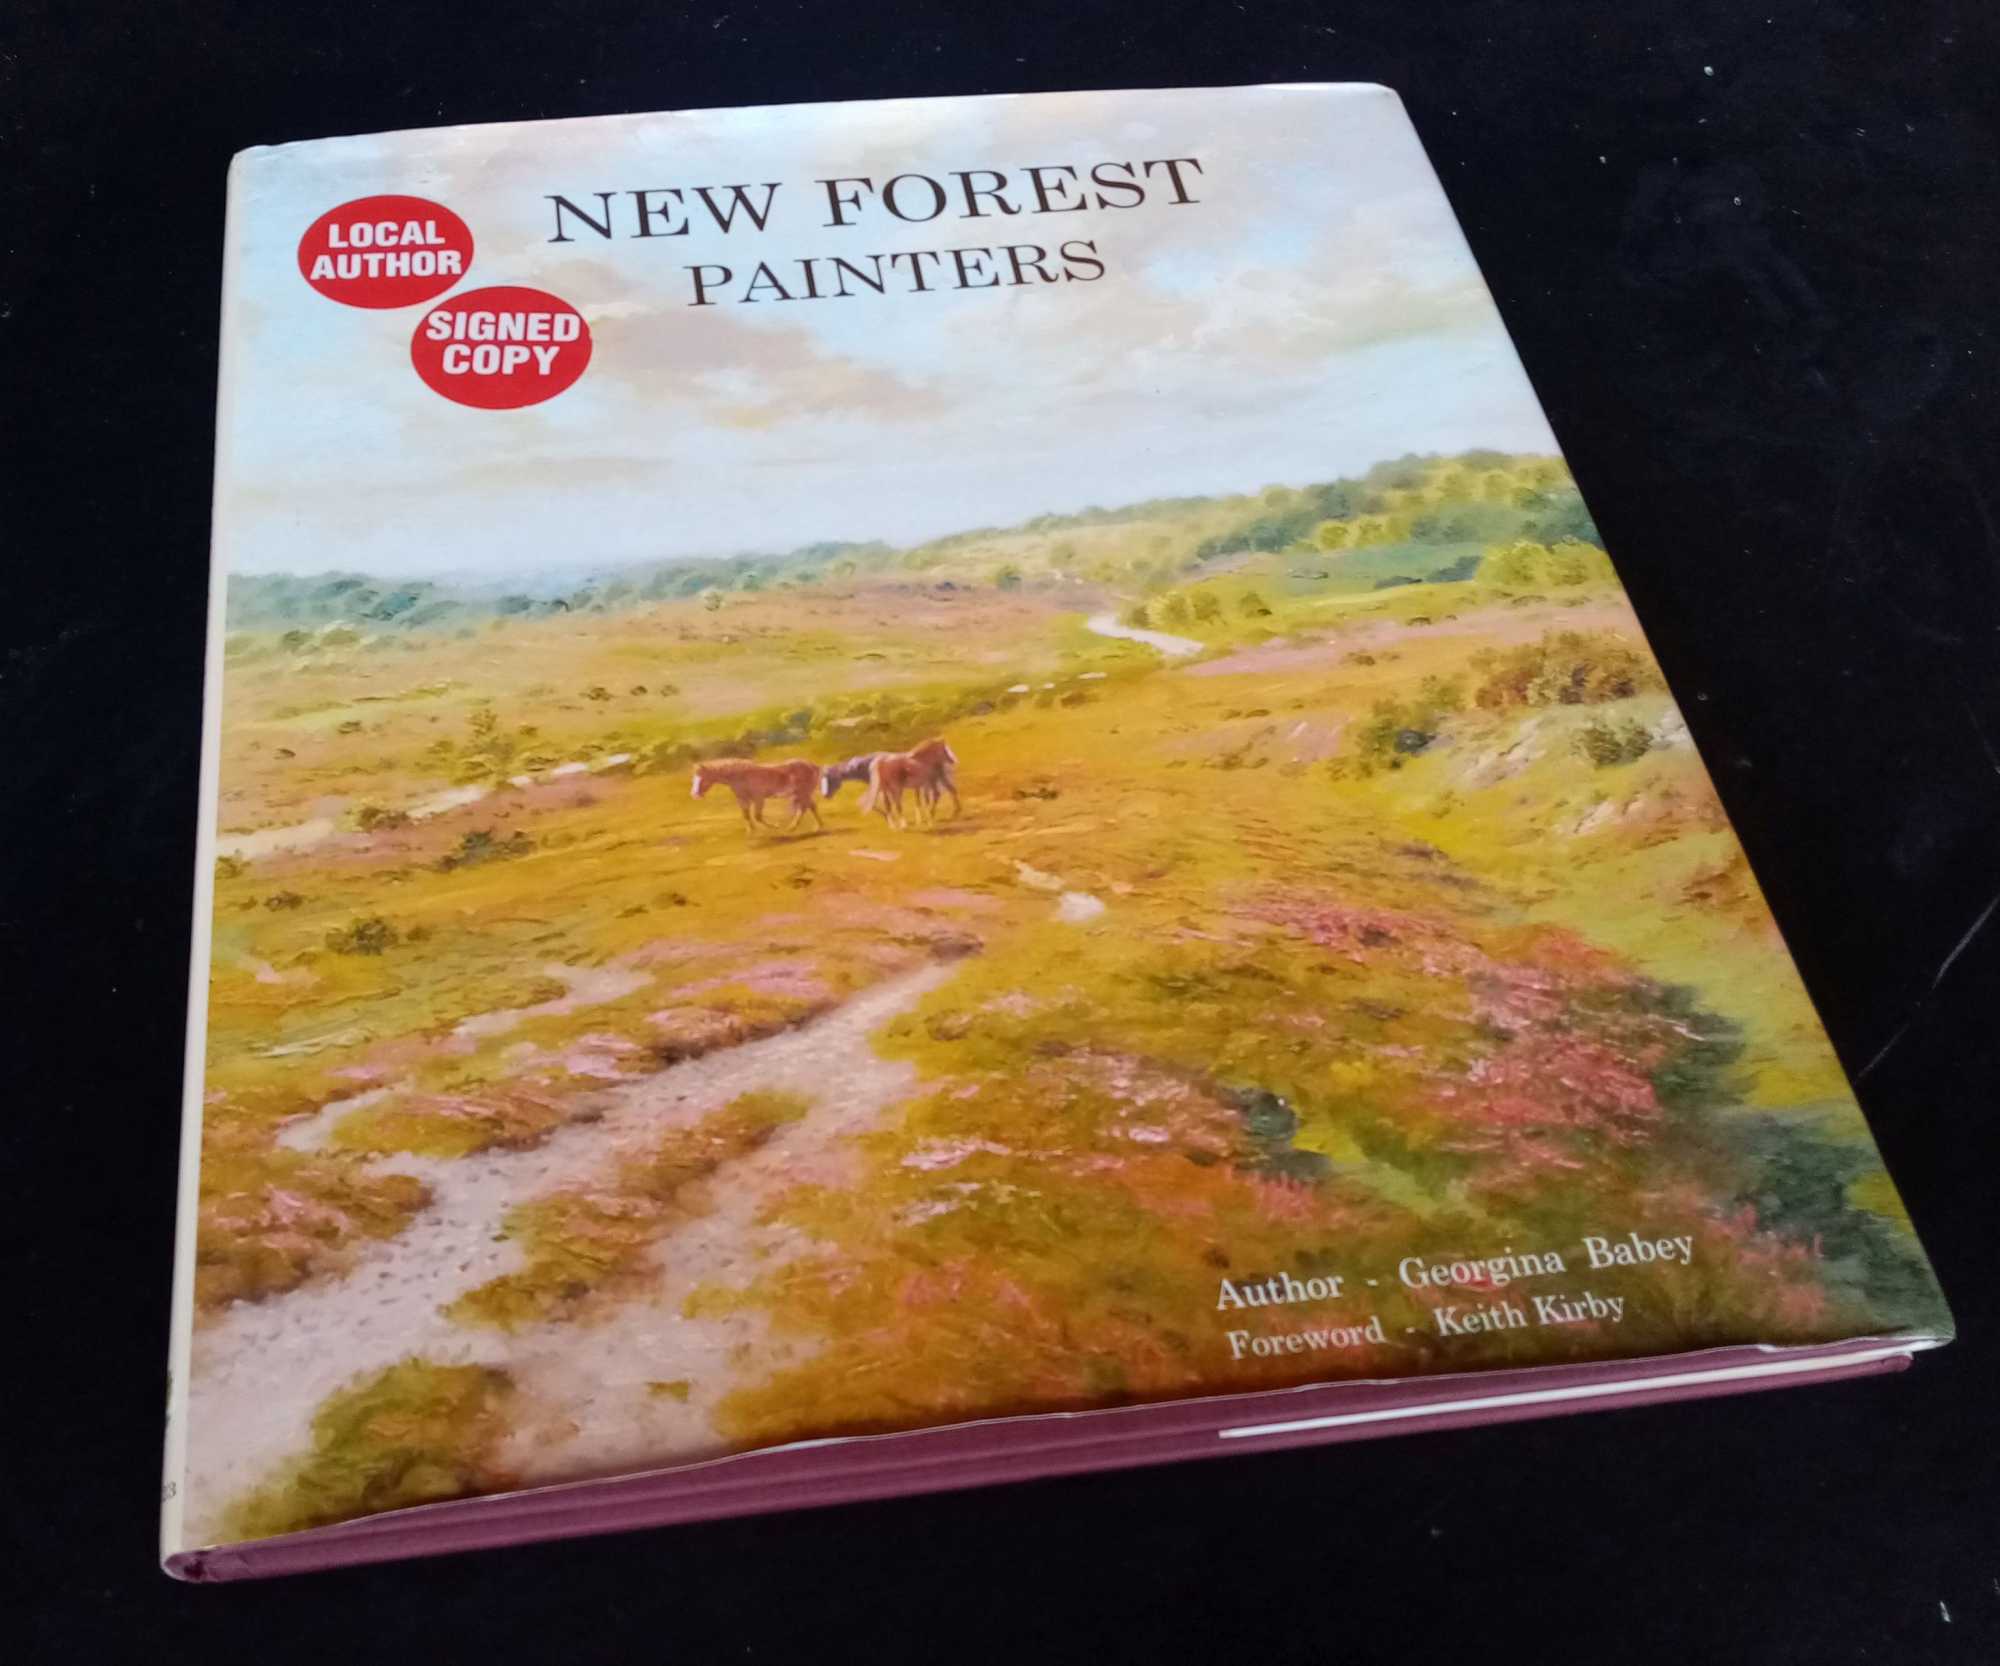 Georgina Babey - New Forest Painters   SIGNED by Author and Artists